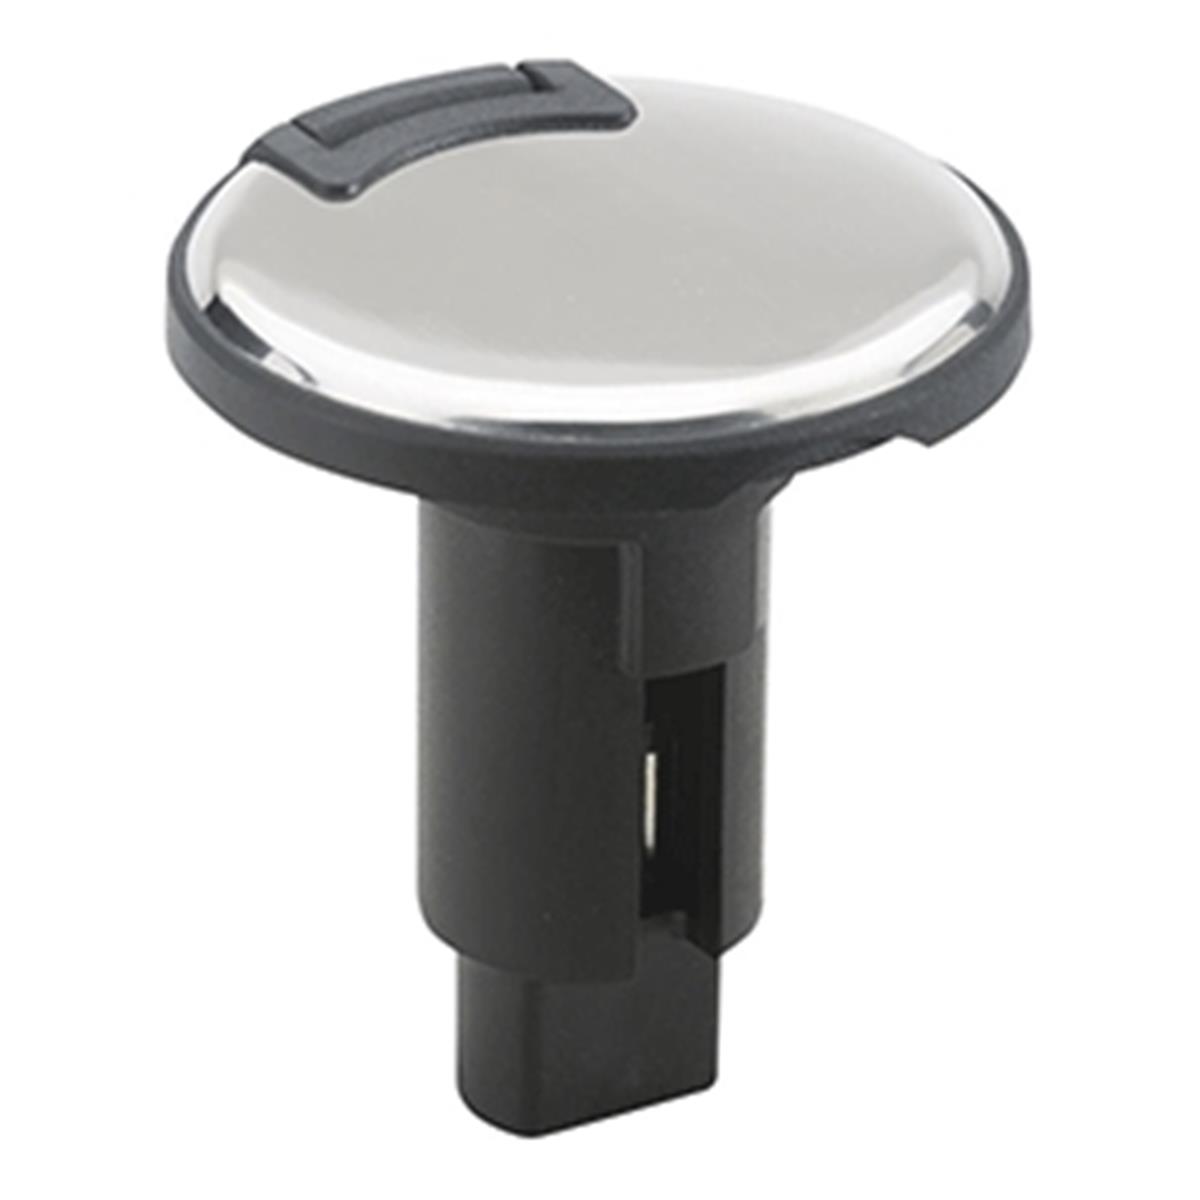 910r2psb-7 2 Pin Lightarmor Plug-in Base, Stainless Steel - Round